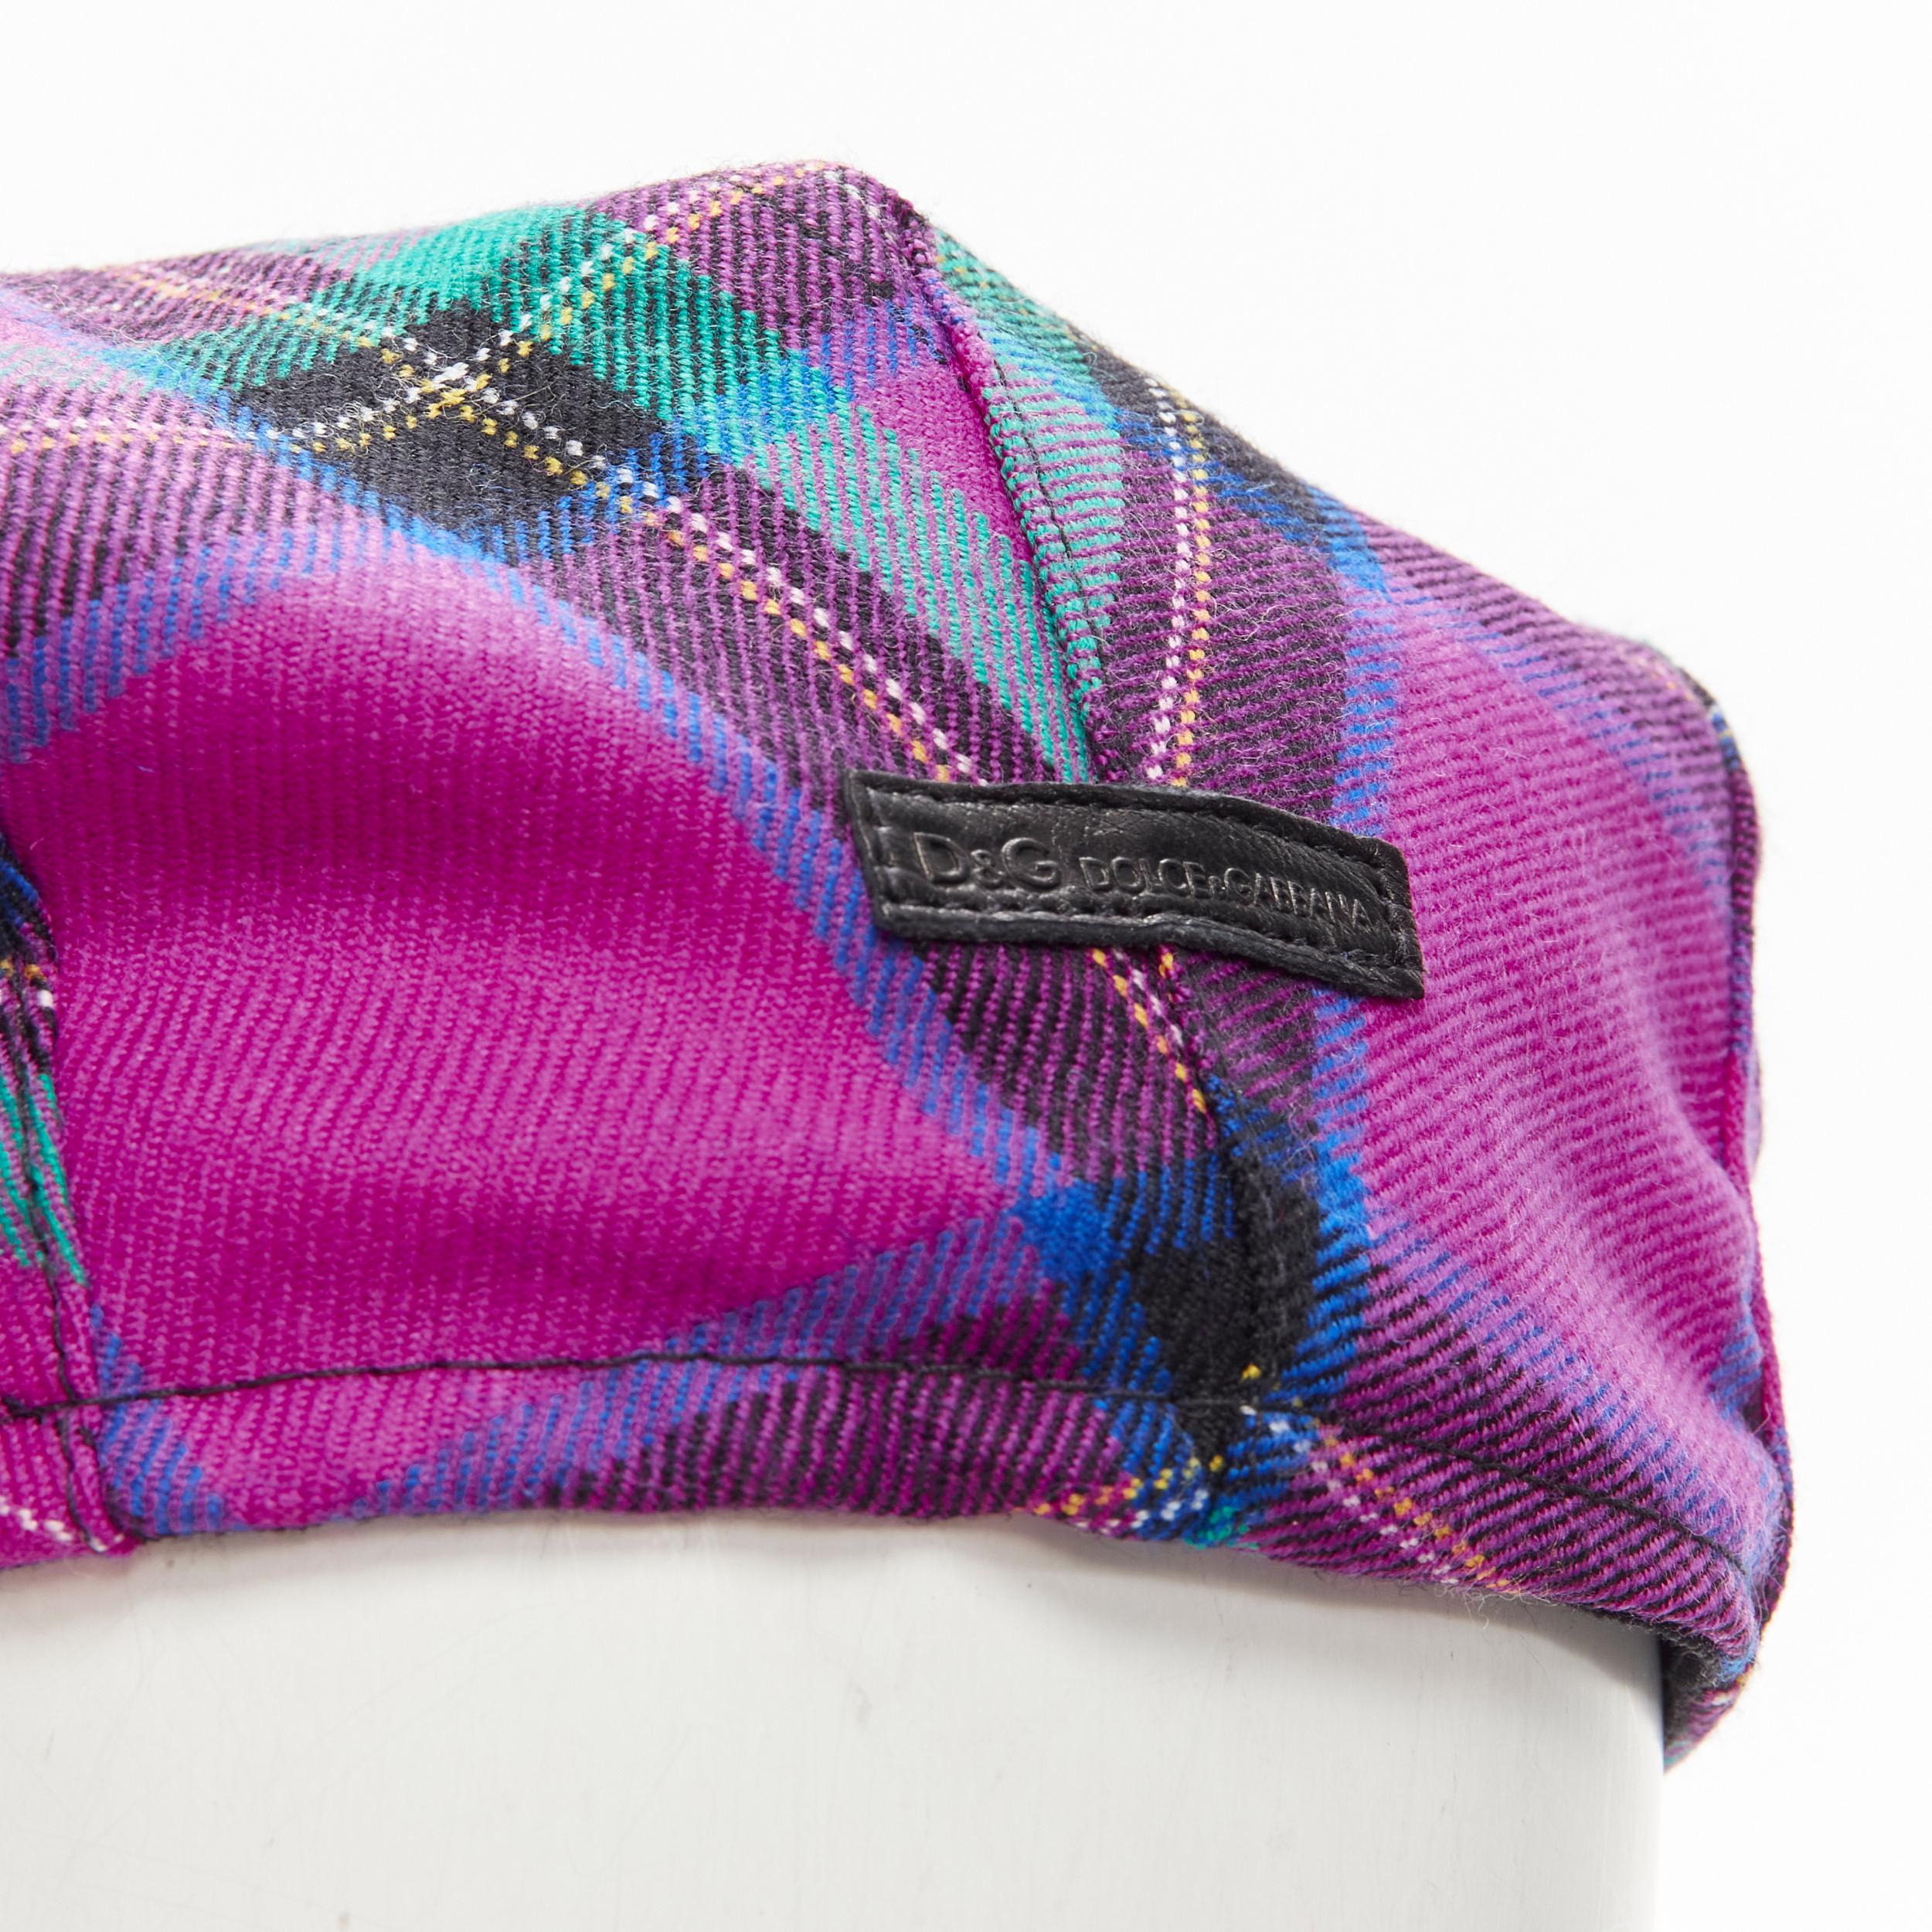 D&G DOLCE GABBANA pink plaid check virgin wool newsboy hat M
Brand: D&G
Designer: Domenico Dolce and Stefano Gabbana
Material: 100% Wool
Color: Purple
Pattern: Plaid
Extra Detail: Snap button at short beak
Made in: Italy

CONDITION:
Condition: